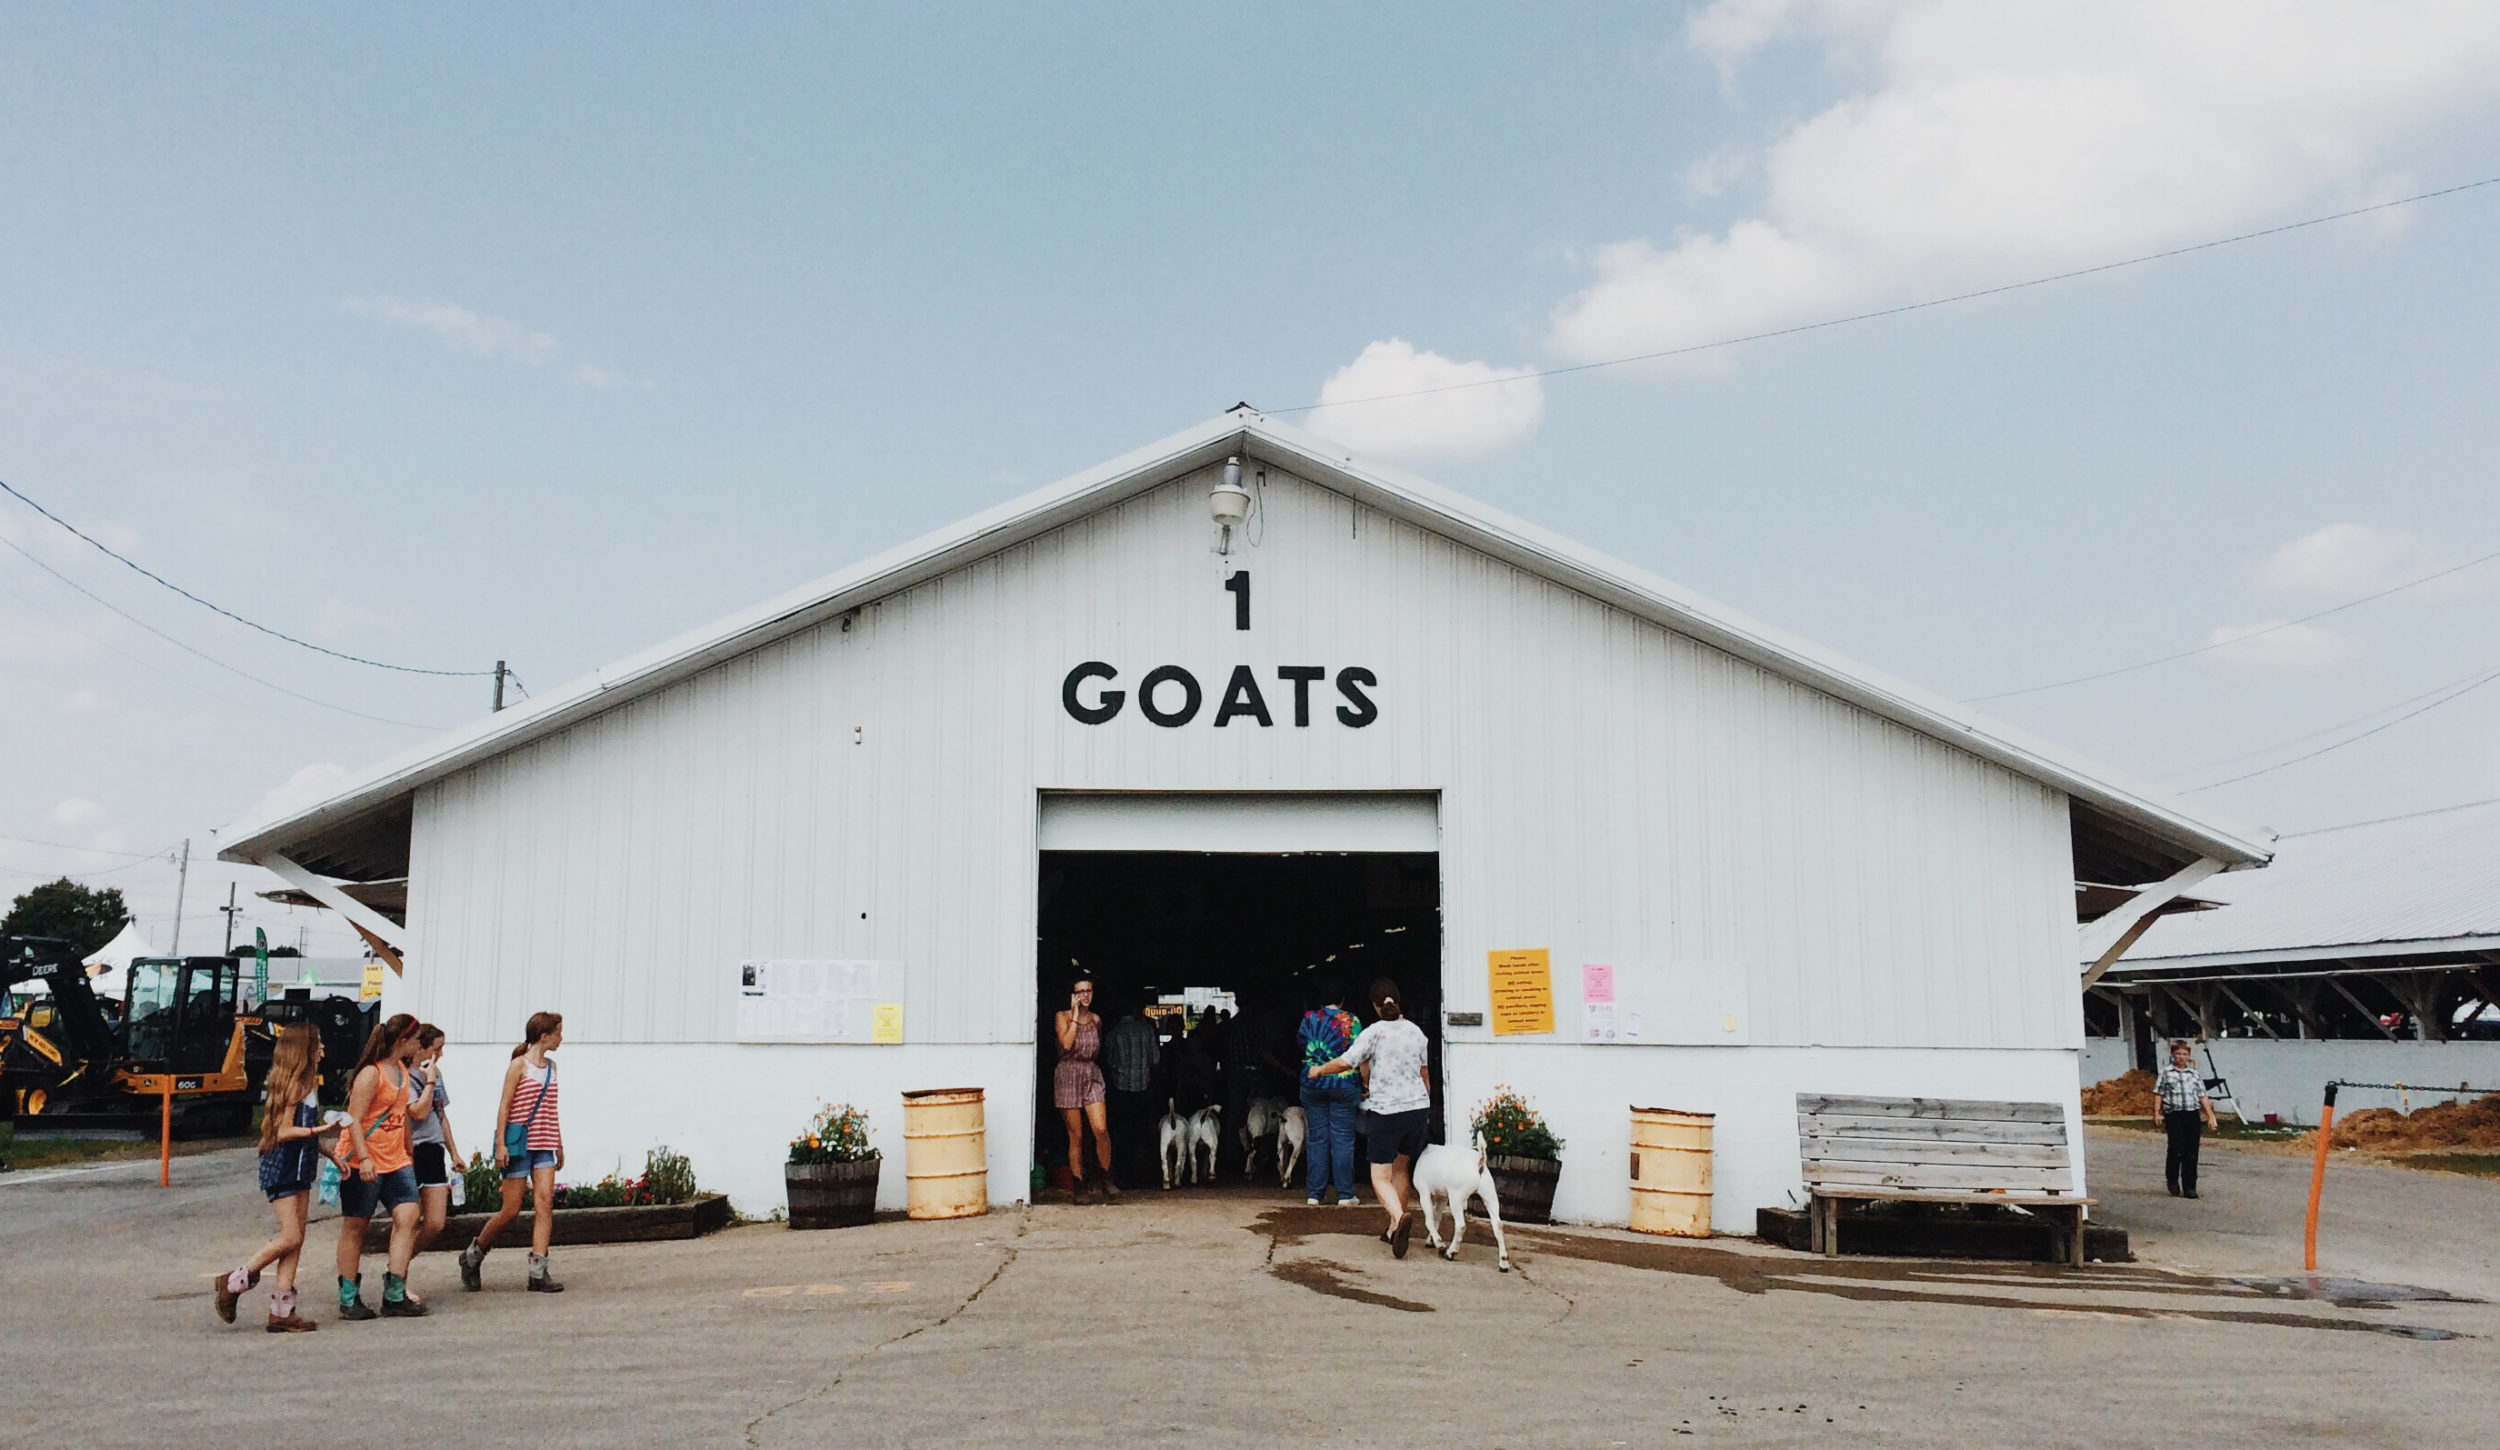 People and goats entering a white building that says, "1 GOATS" on it